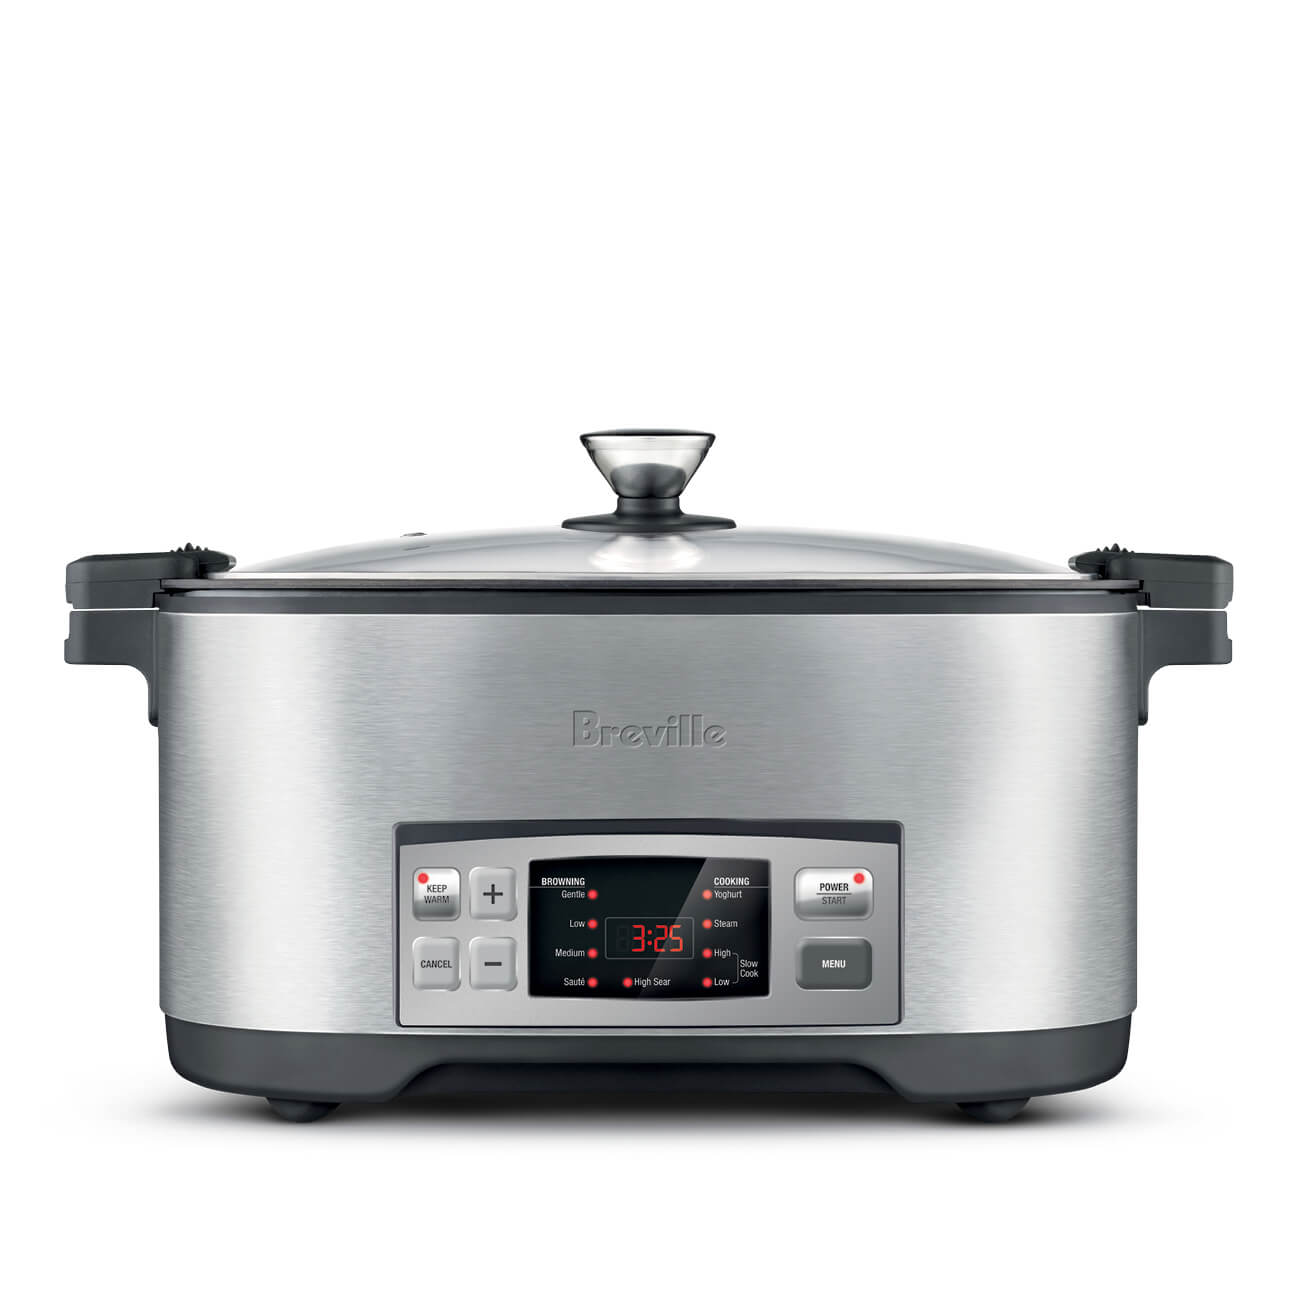 The Searing Slow Cooker Breville